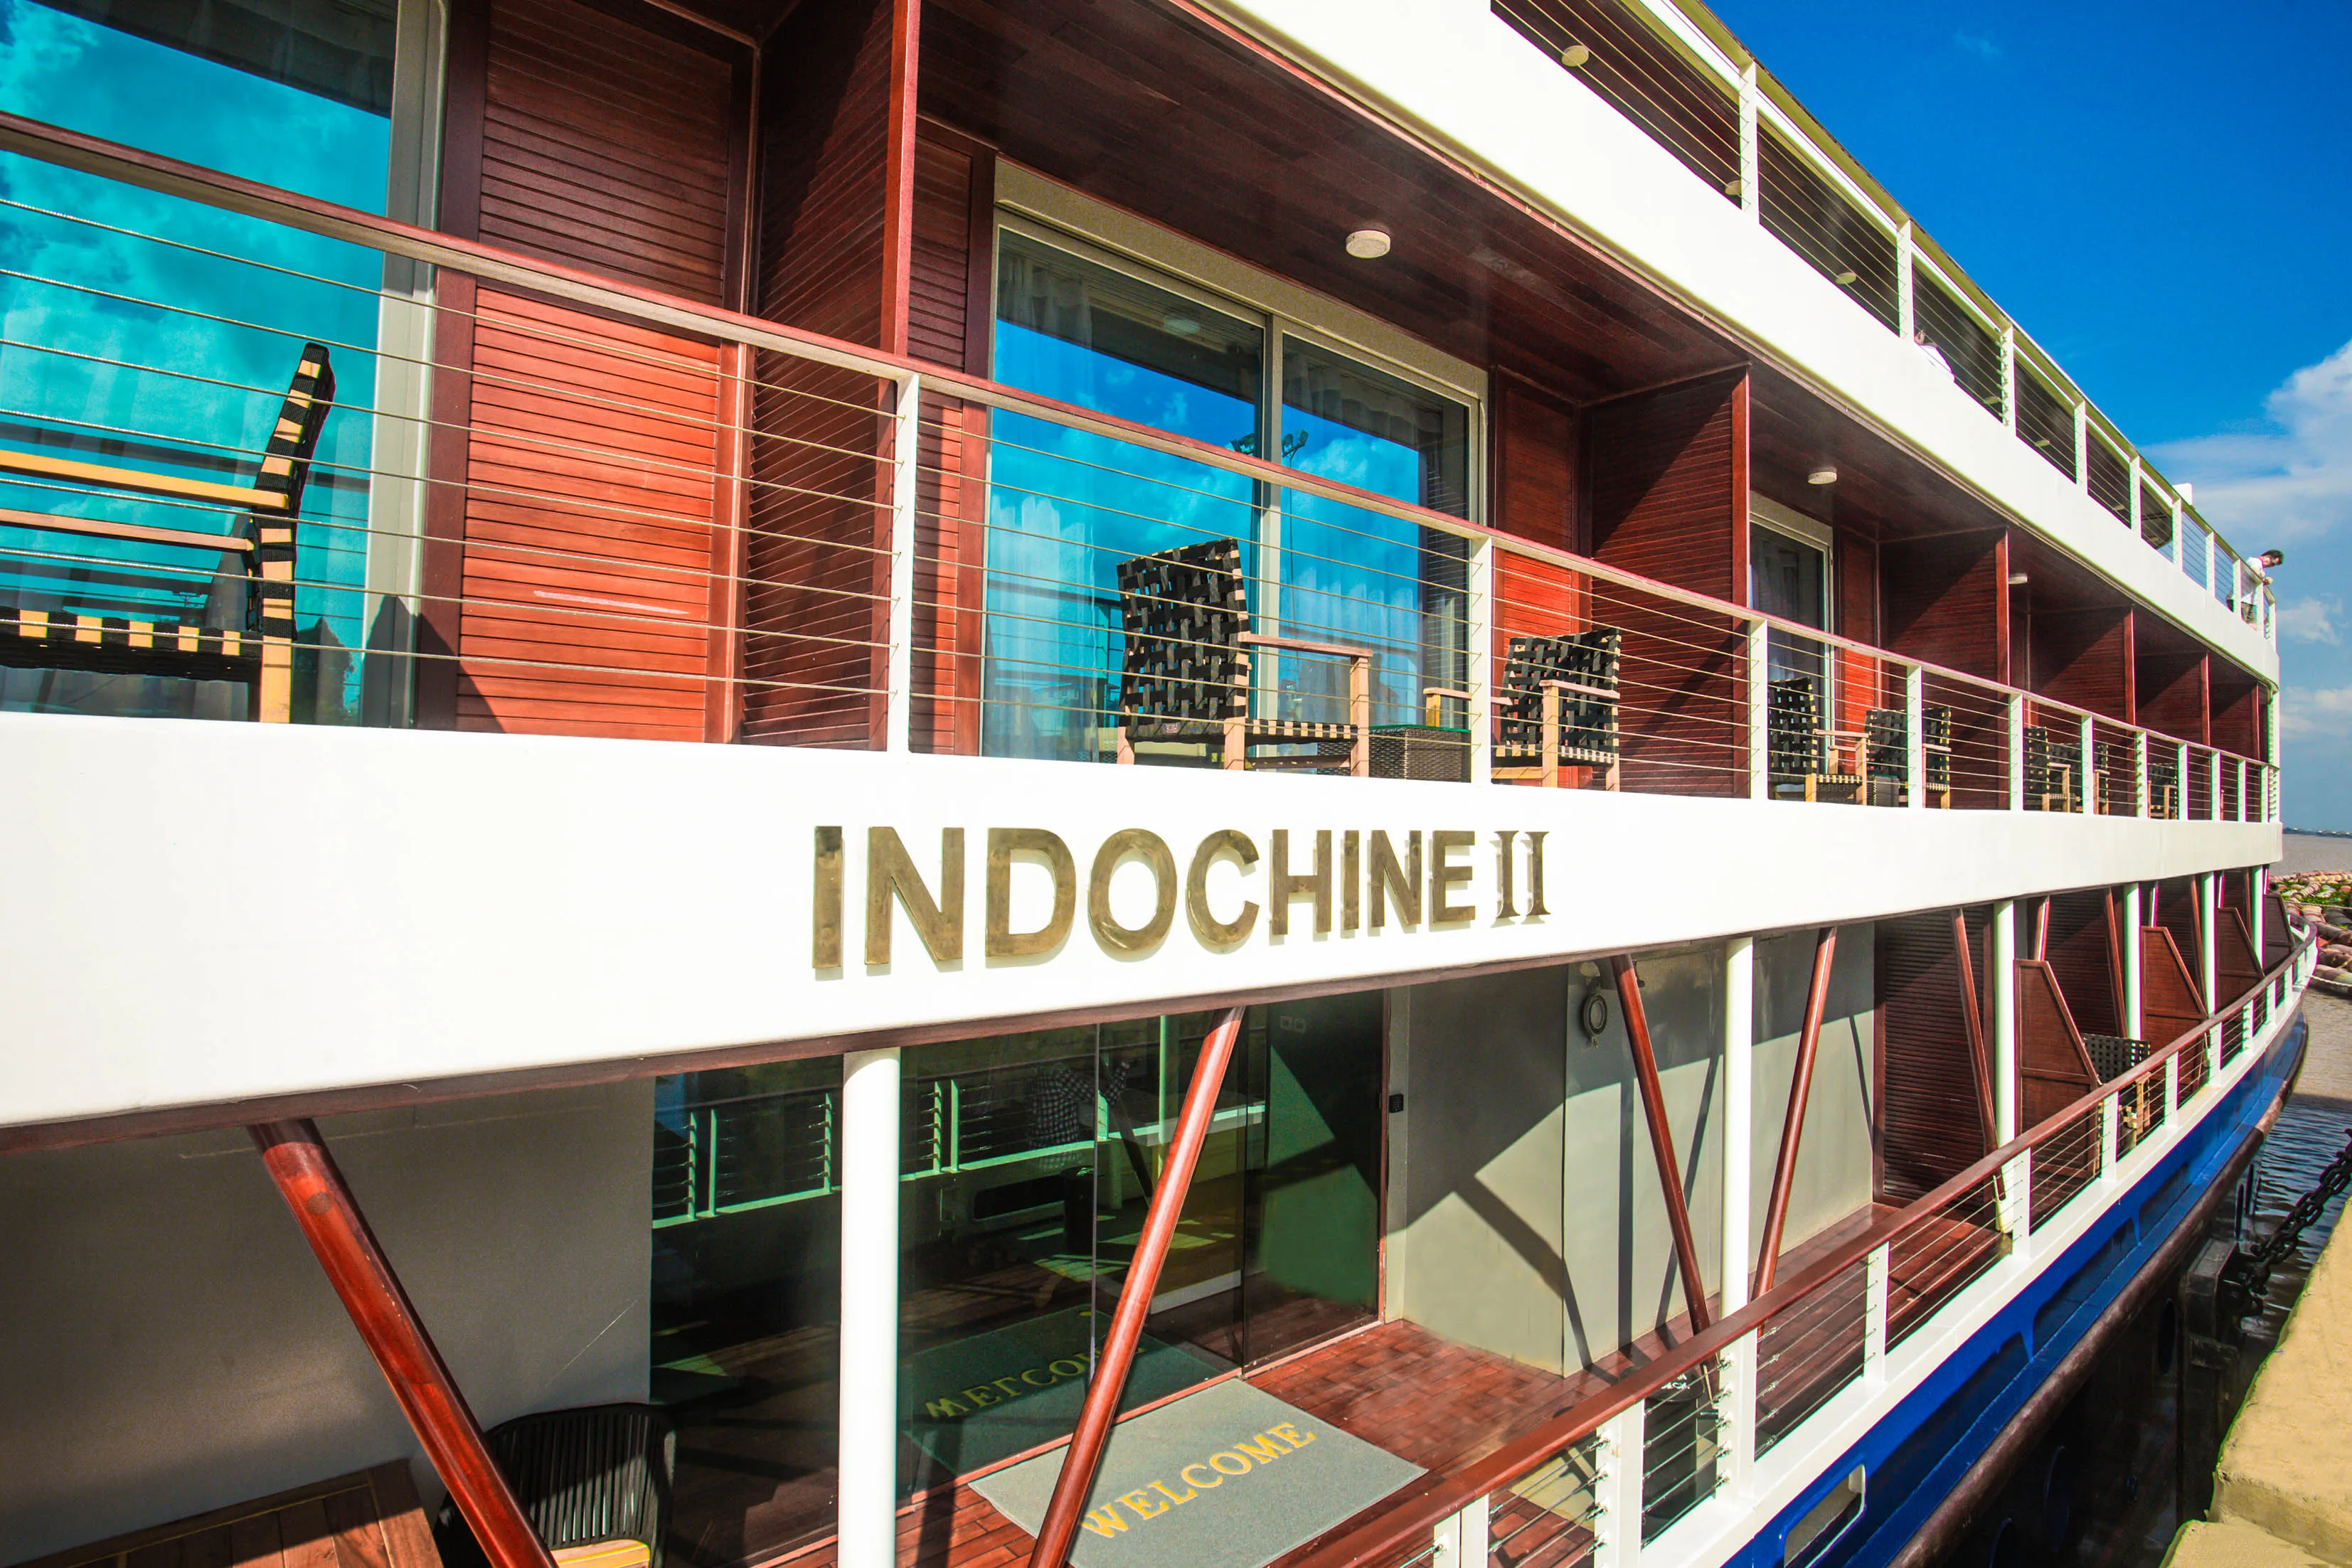 Details of the RV Indochine II